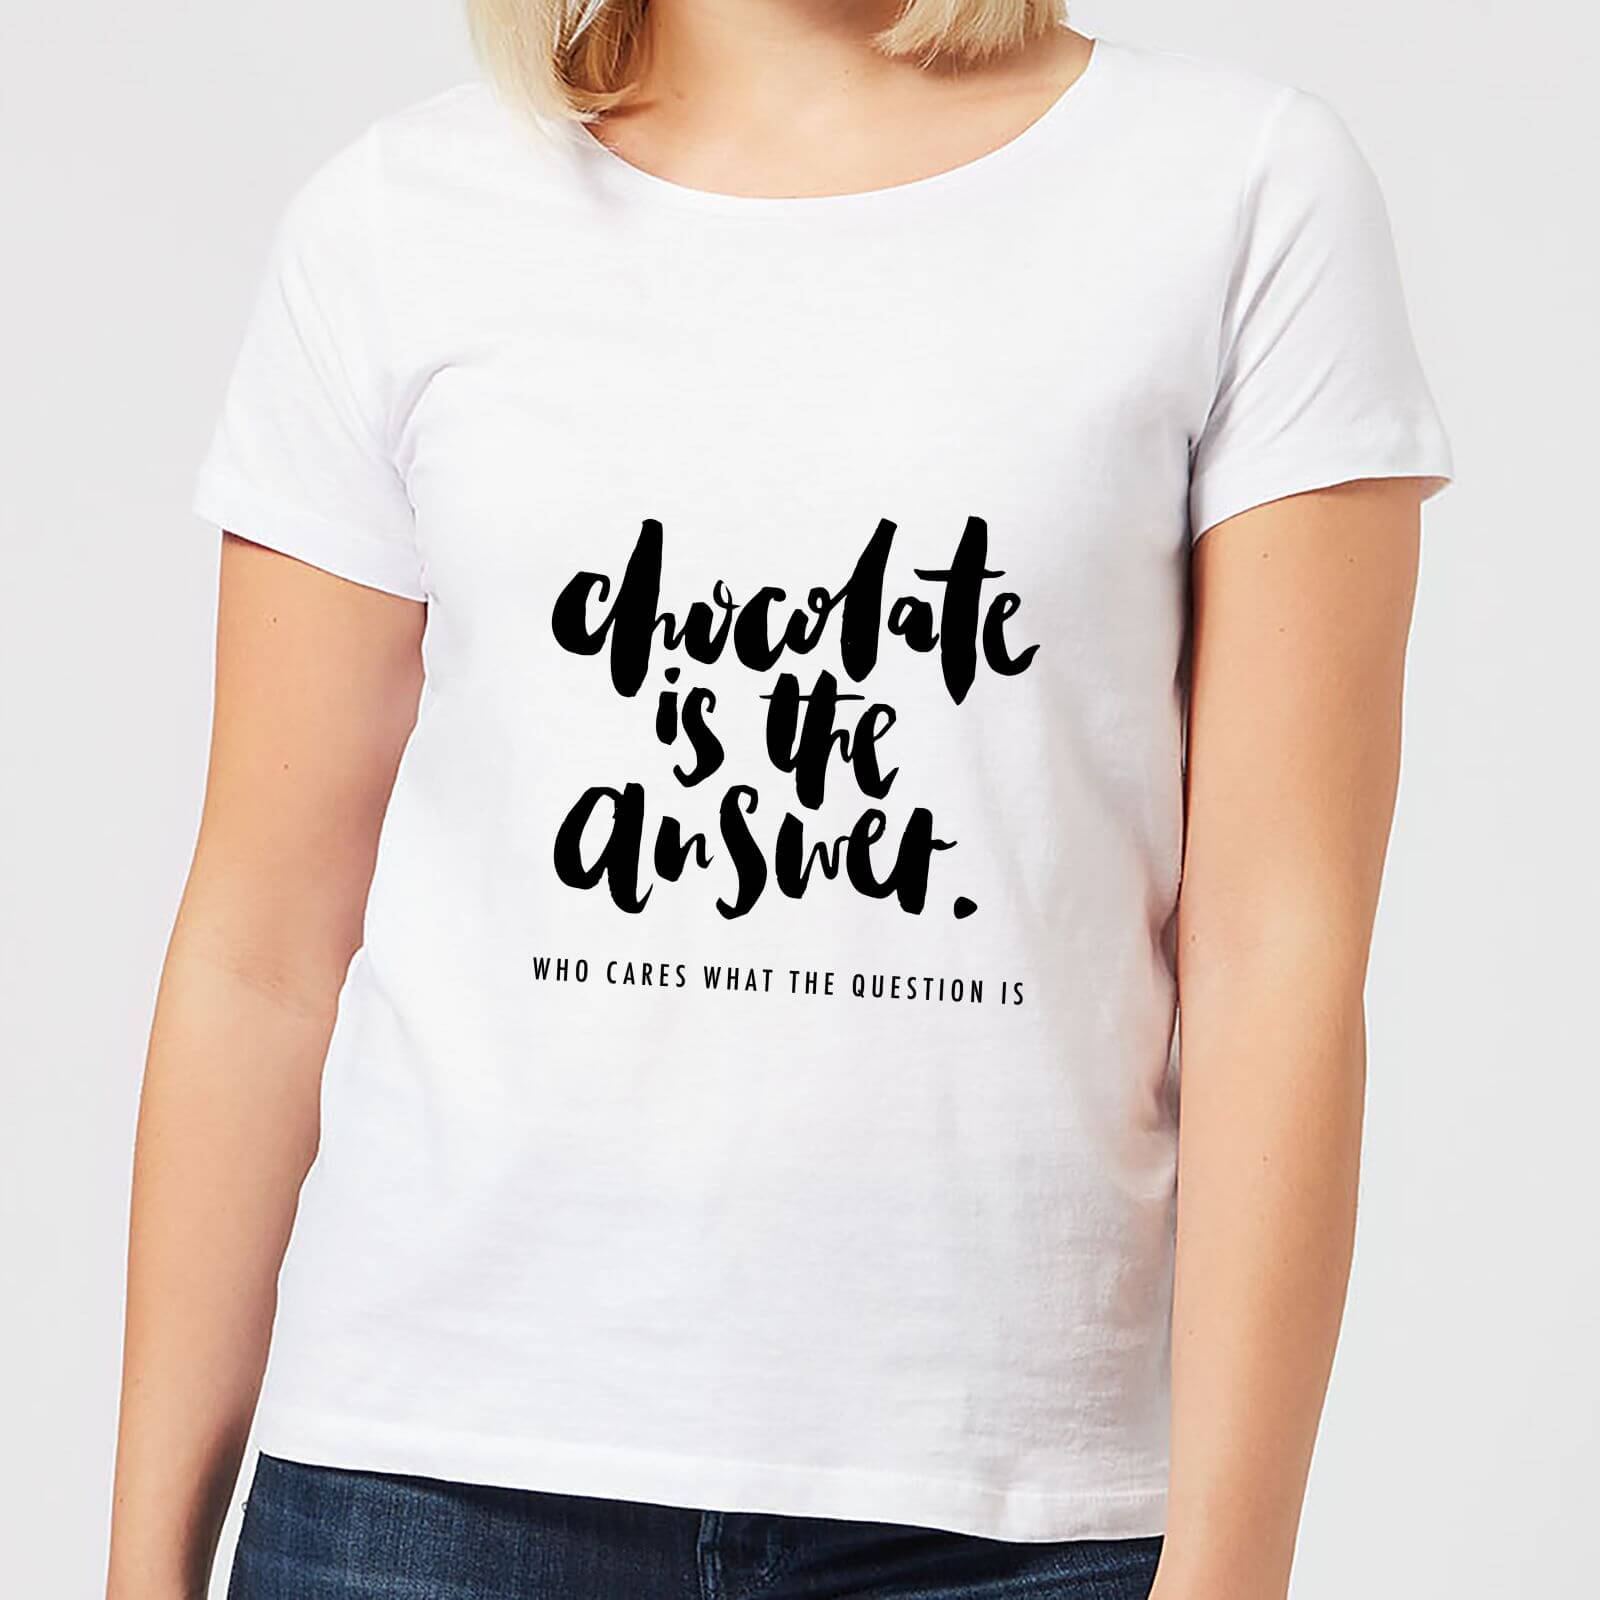 Chocolate Is The Answer Women's T-Shirt - White - S - White